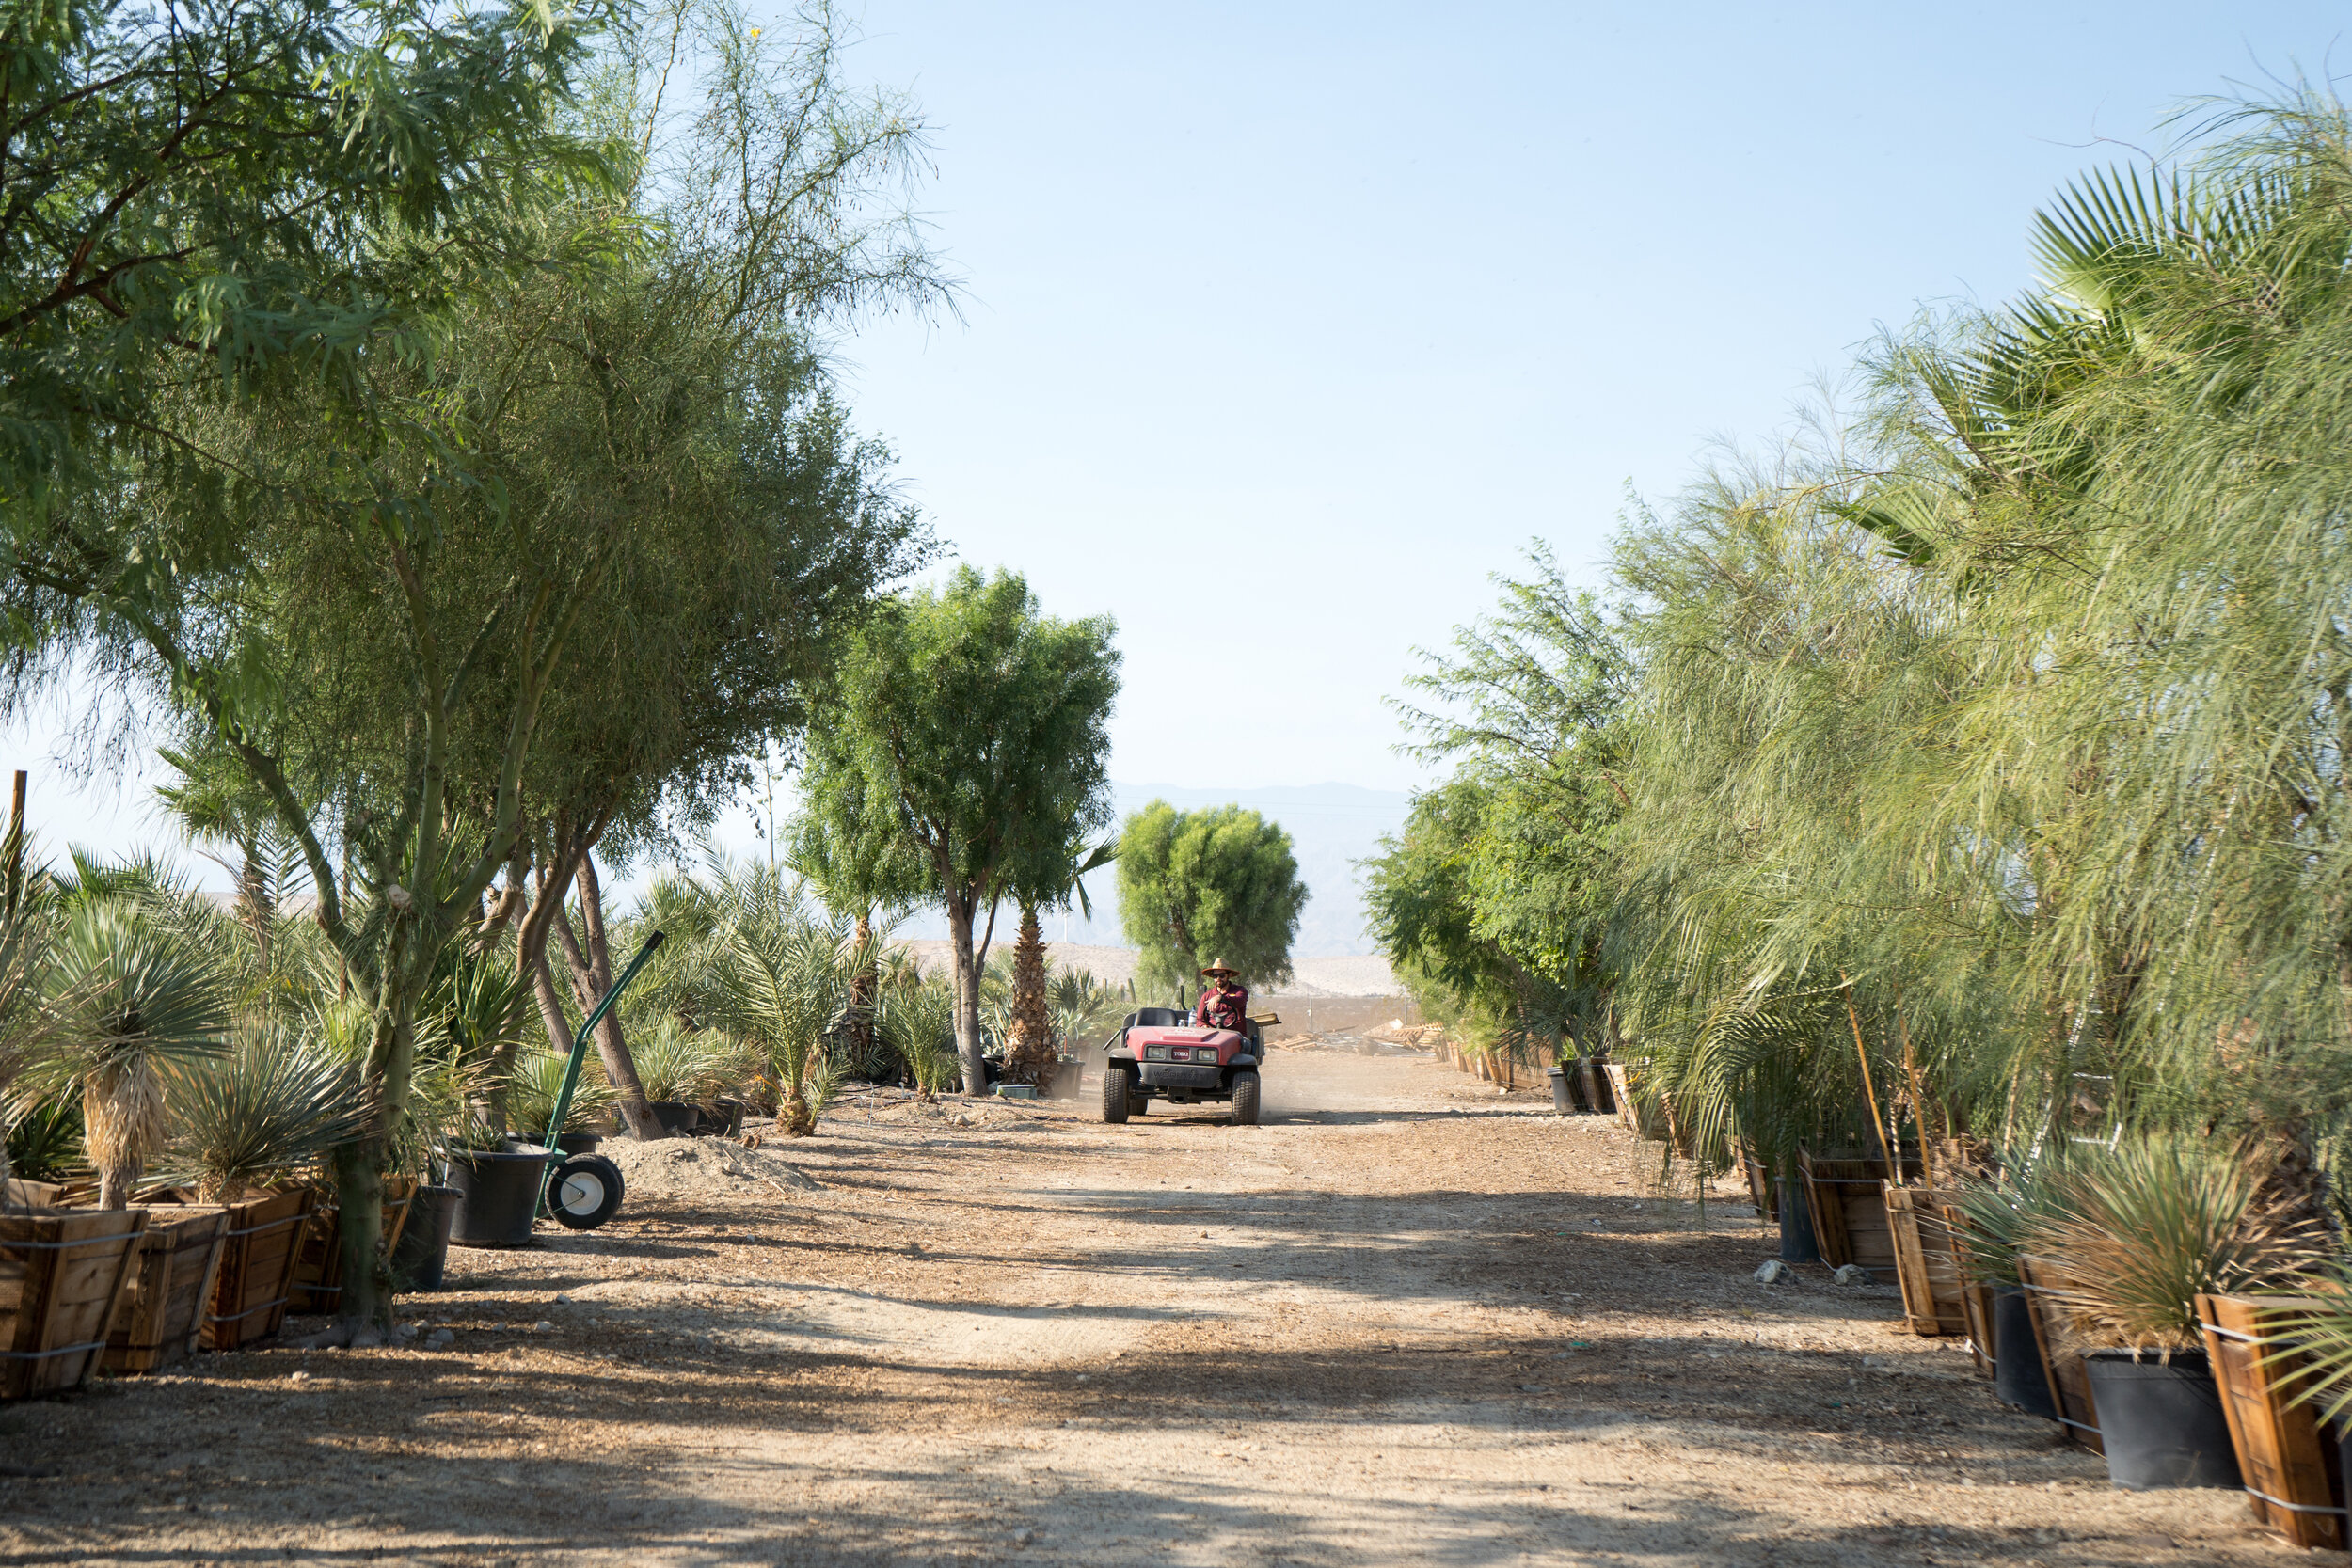 Weeping Willow Trees - Fast Growing Shade Trees for the Desert